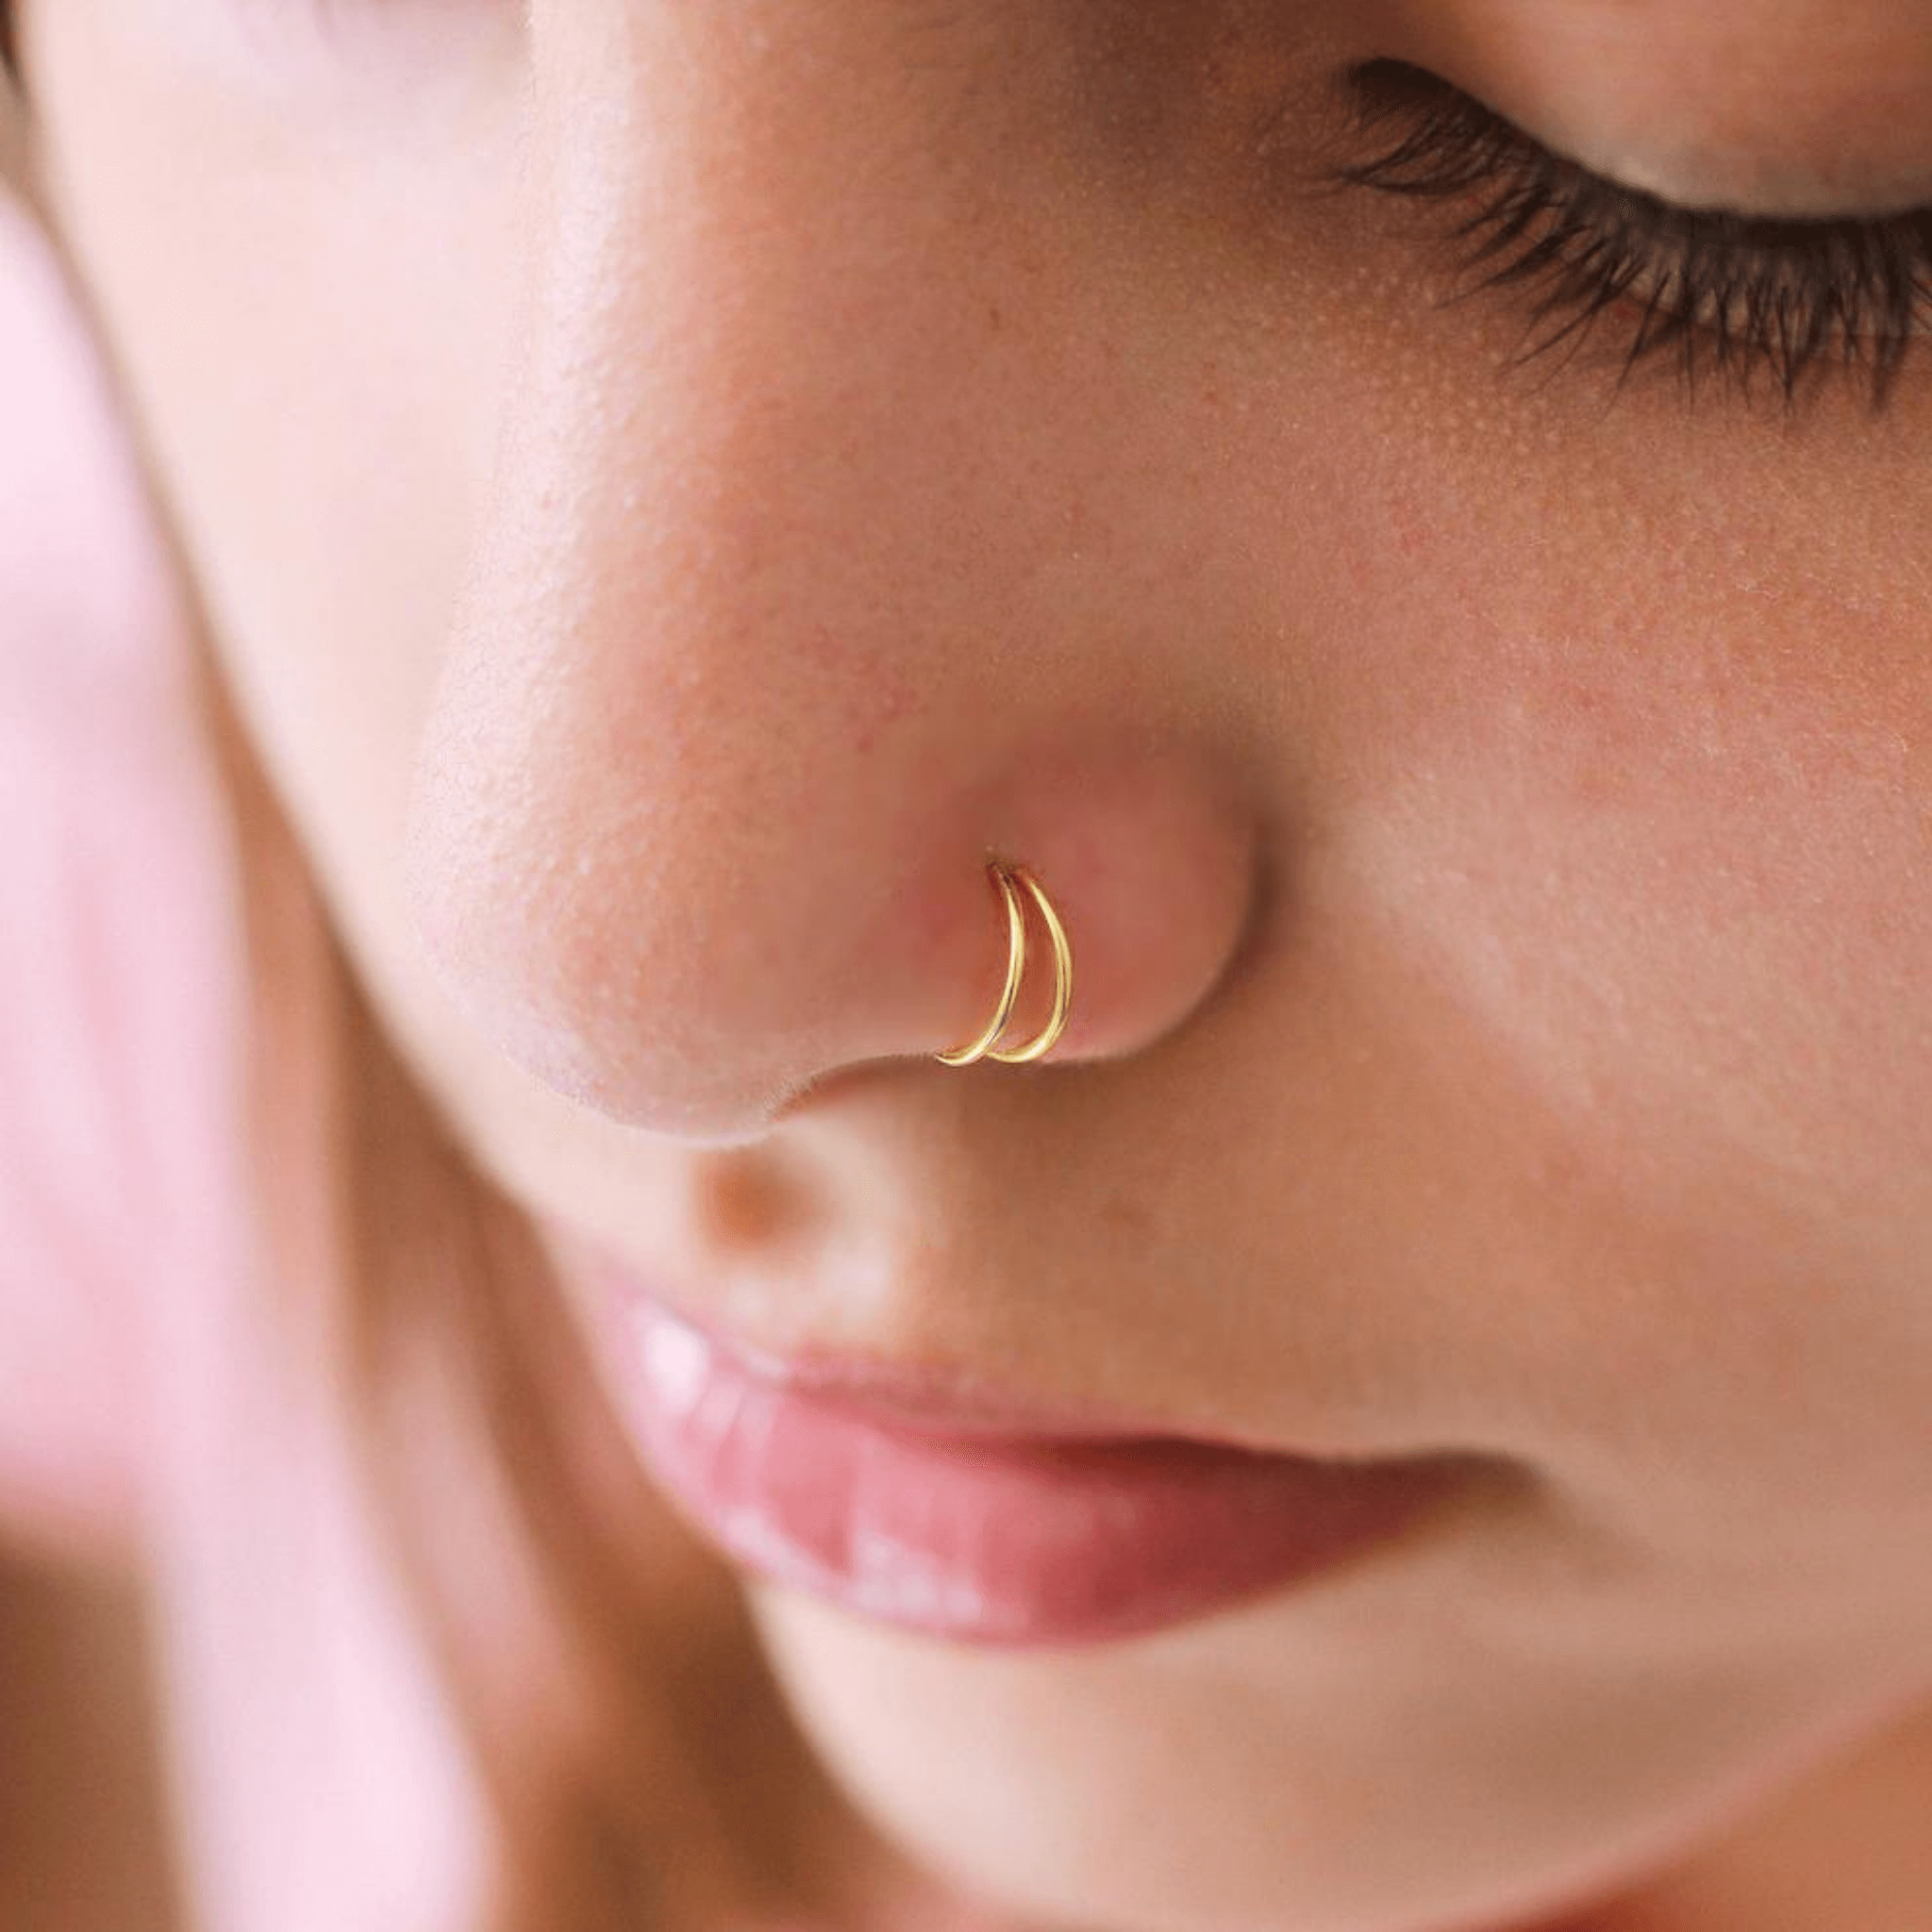 Gold Nose Ring, SOLID GOLD Nose Hoop, Moon Nose Ring, 14k Nose Ring, Snug Nose  Hoop, 14k Cartilage, Tragus, Helix, Septum Ring - Etsy